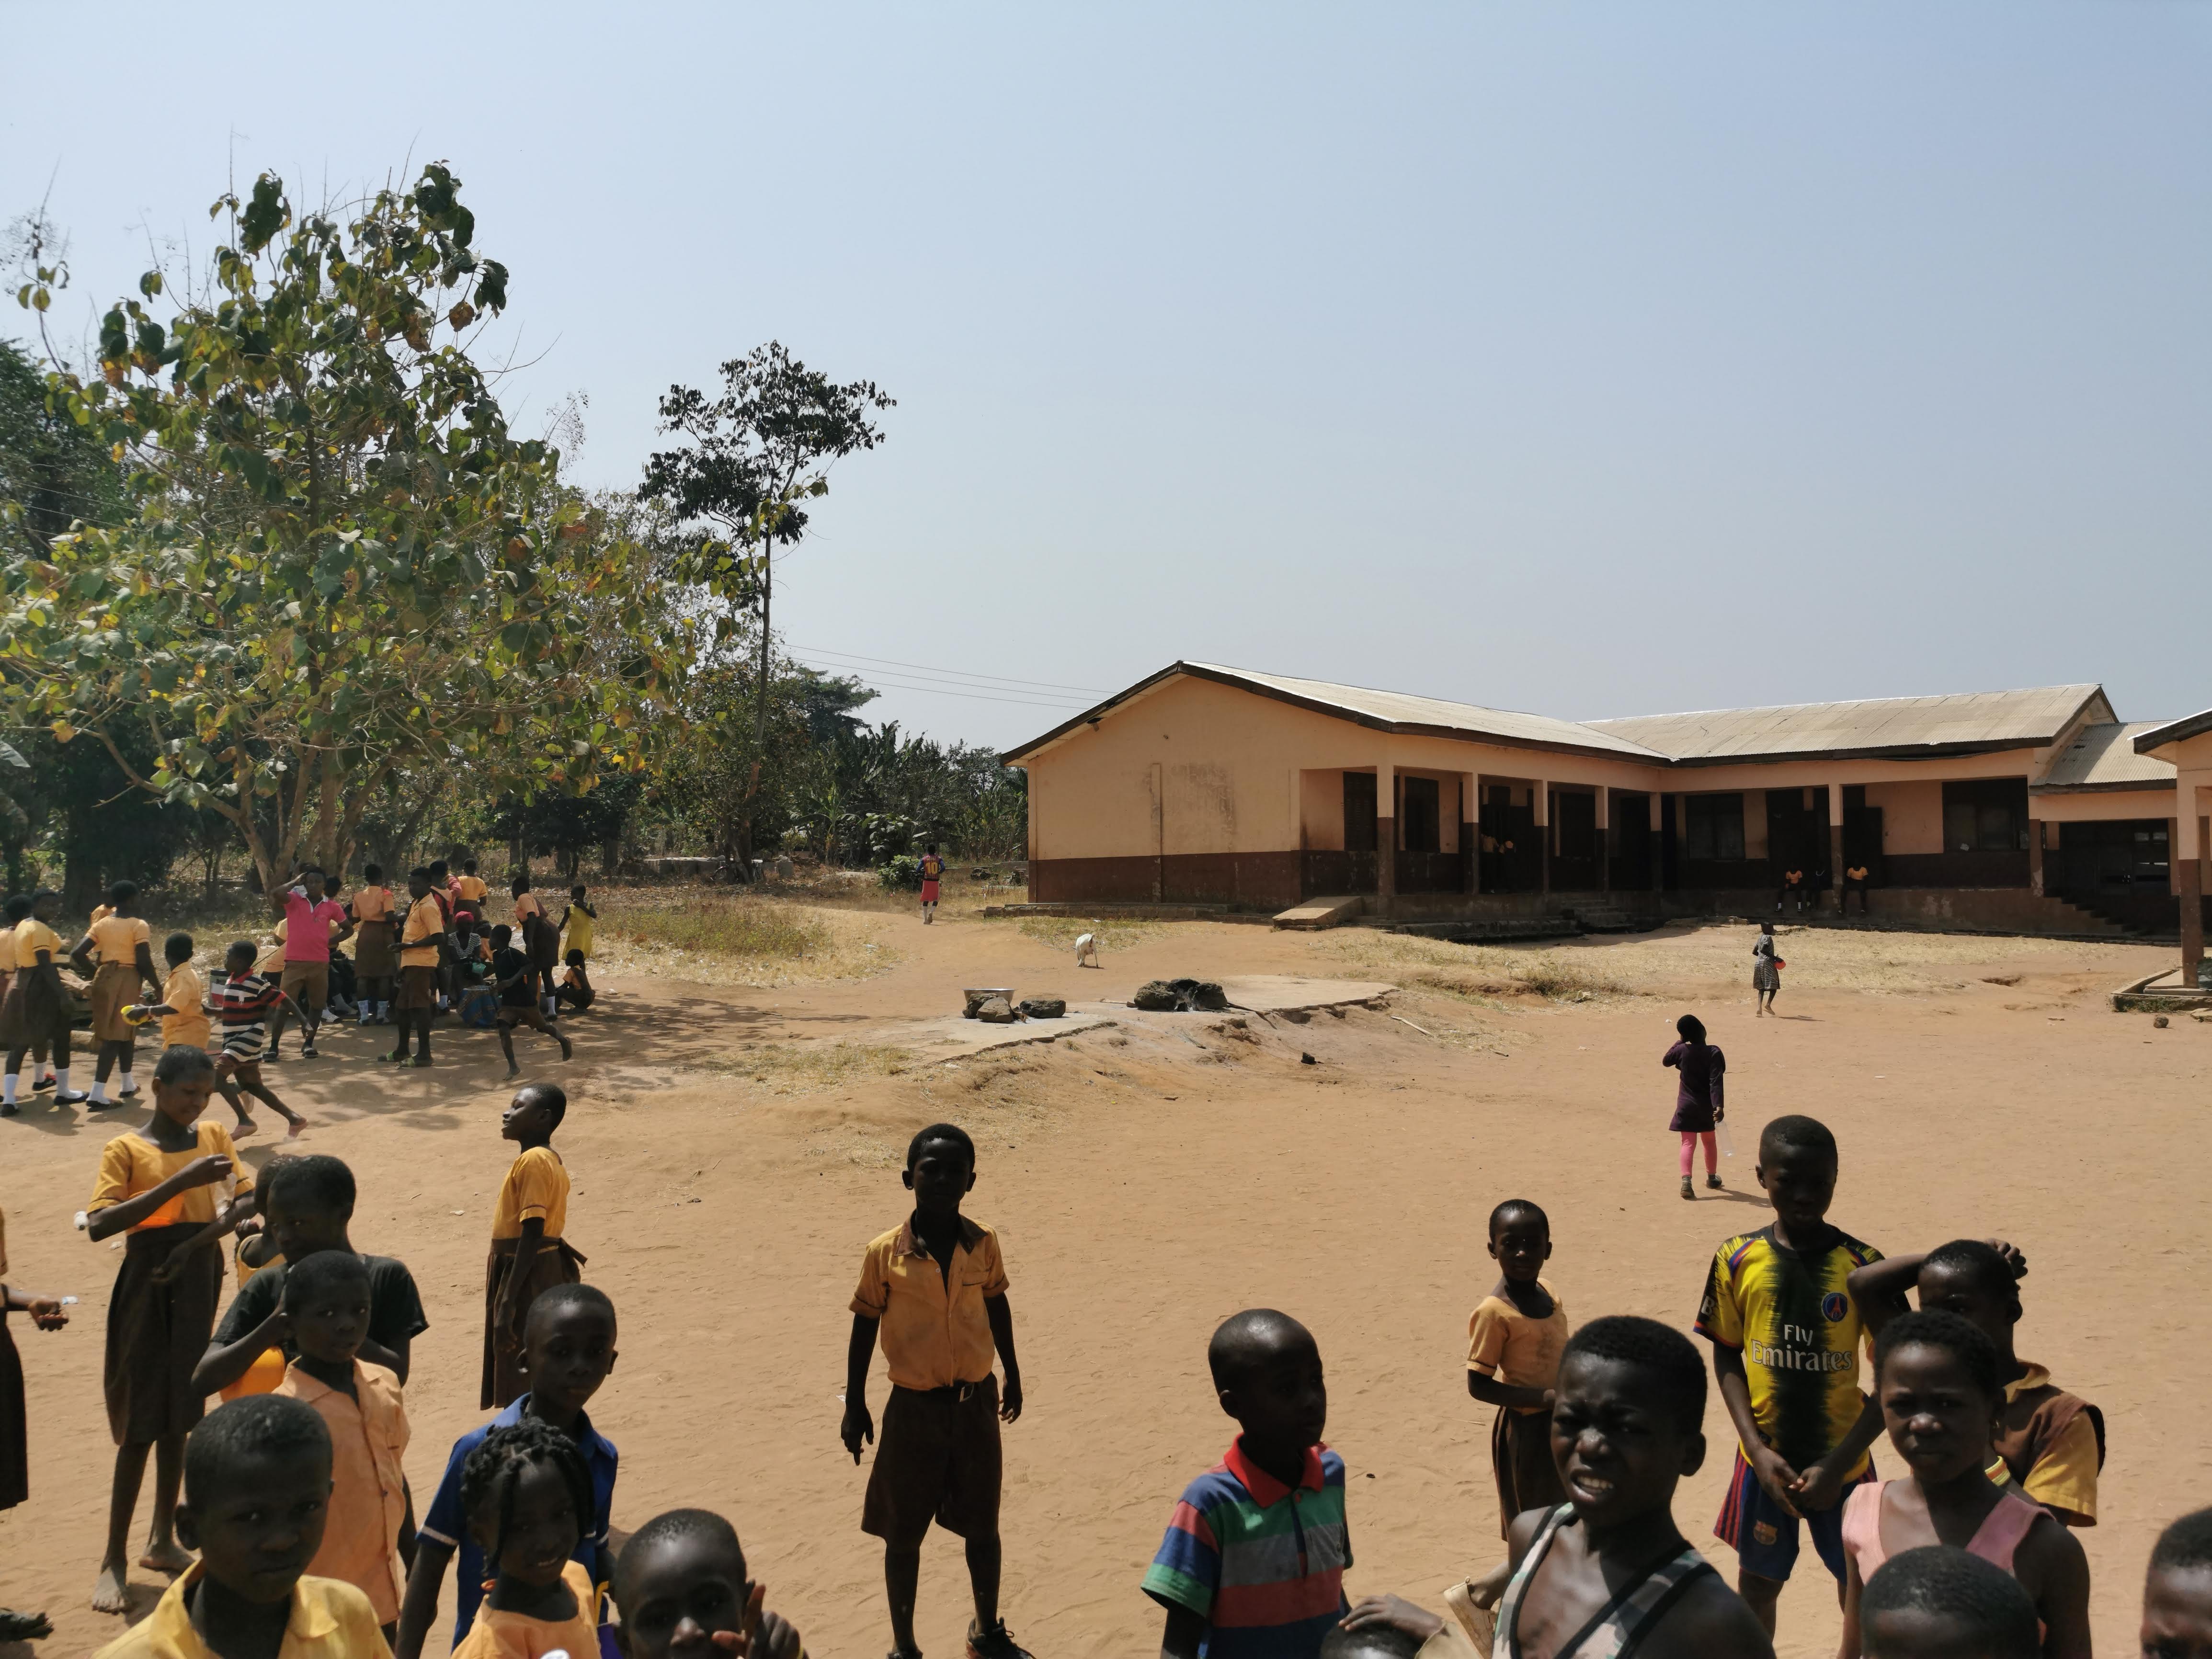 School from distance